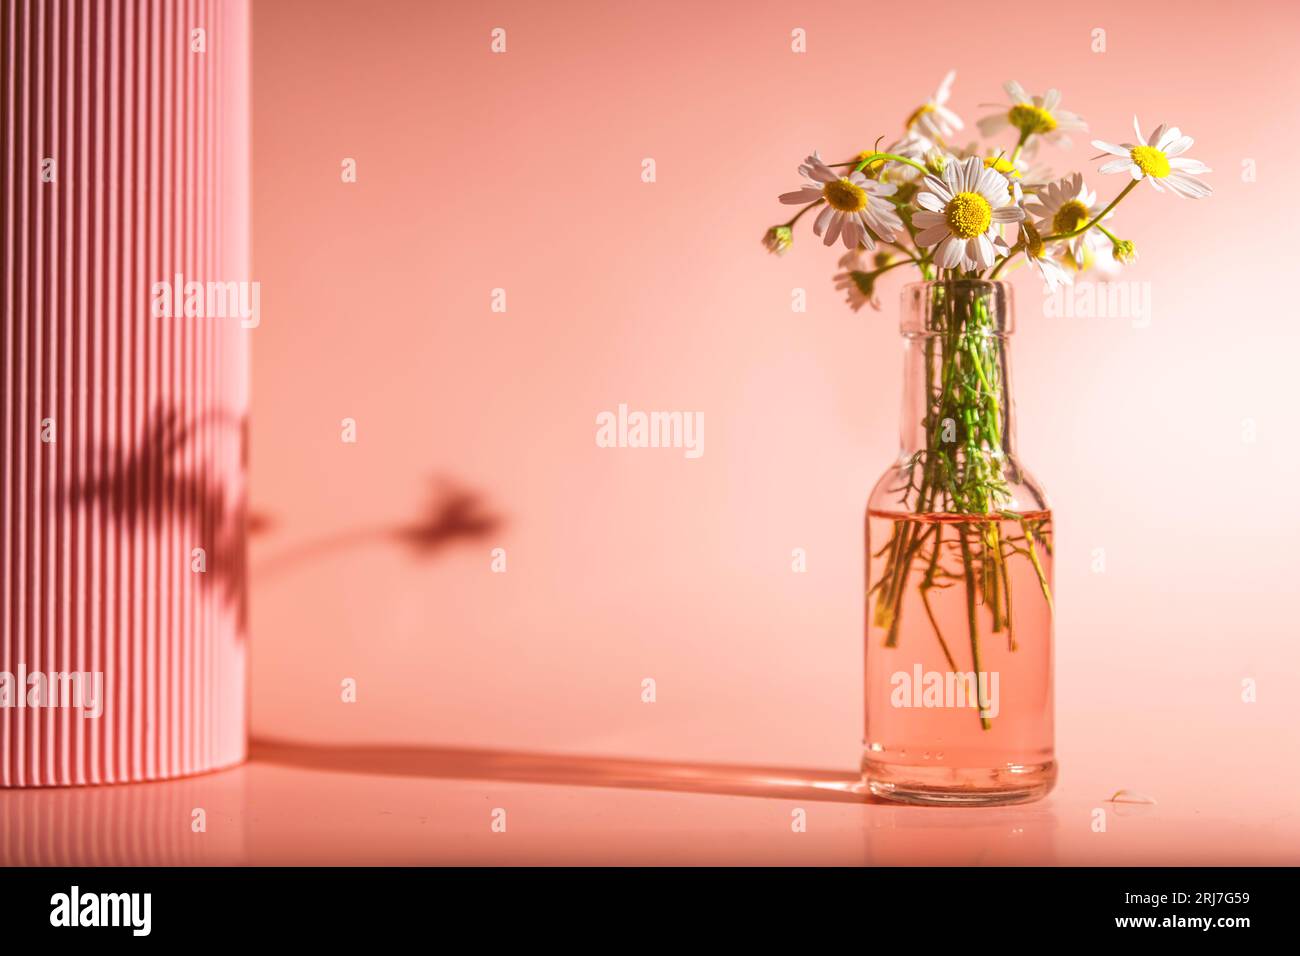 Delicate daisies in a vase on a pink background. barbie pink, aith copy space Stock Photo